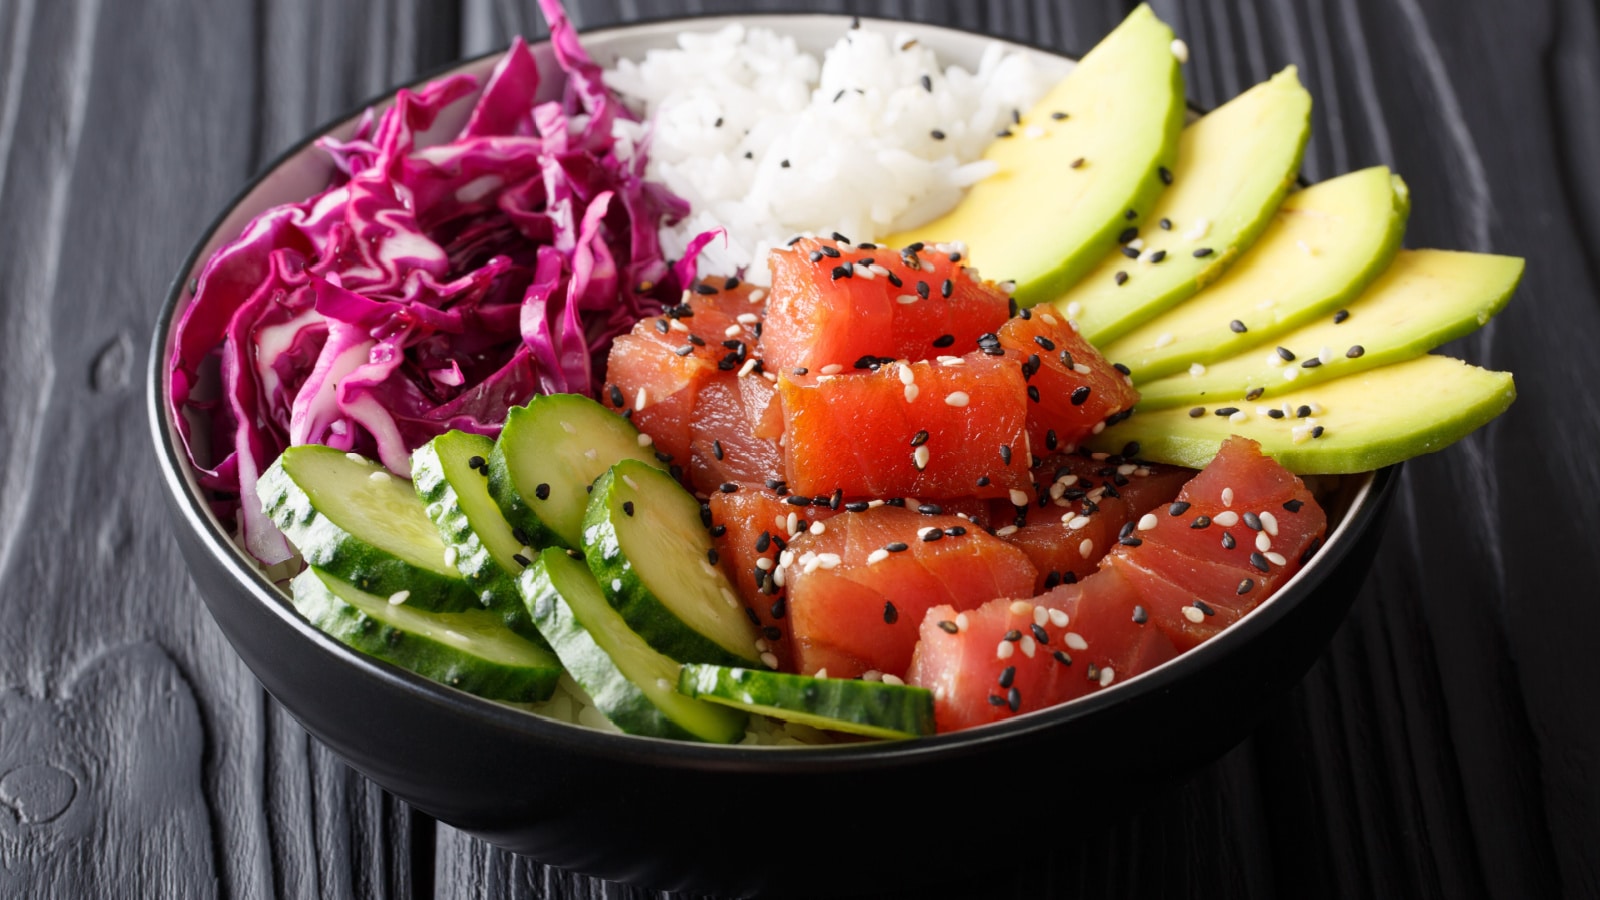 Organic food: tuna poke bowl with rice, fresh cucumbers, red cabbage and avocado close-up on the table. horizontal